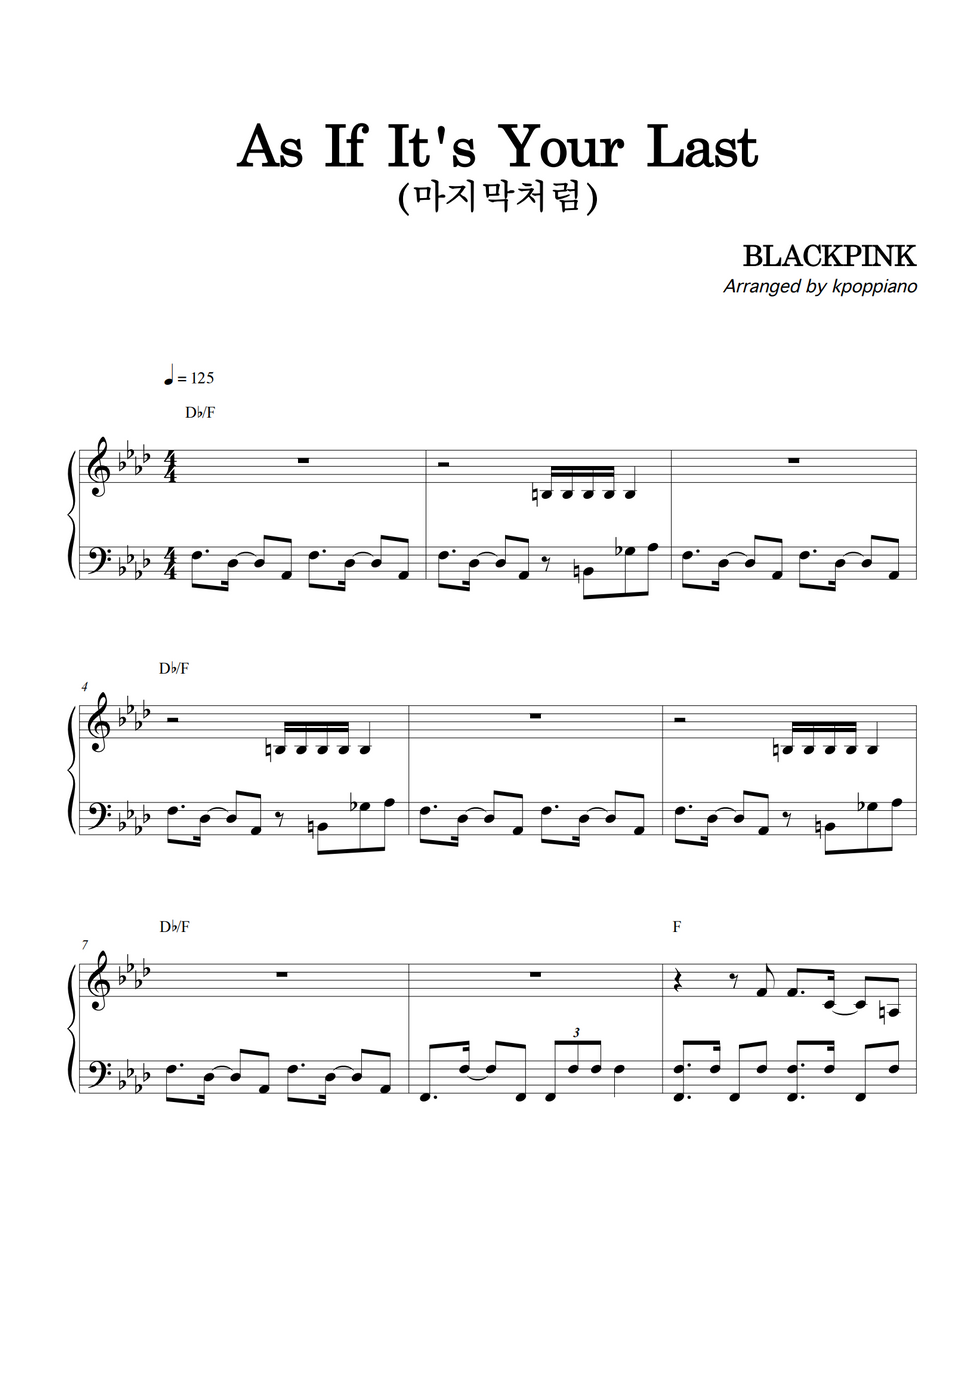 BLACKPINK - 最後のように (AS IF IT'S YOUR LAST) by KPOP PIANO